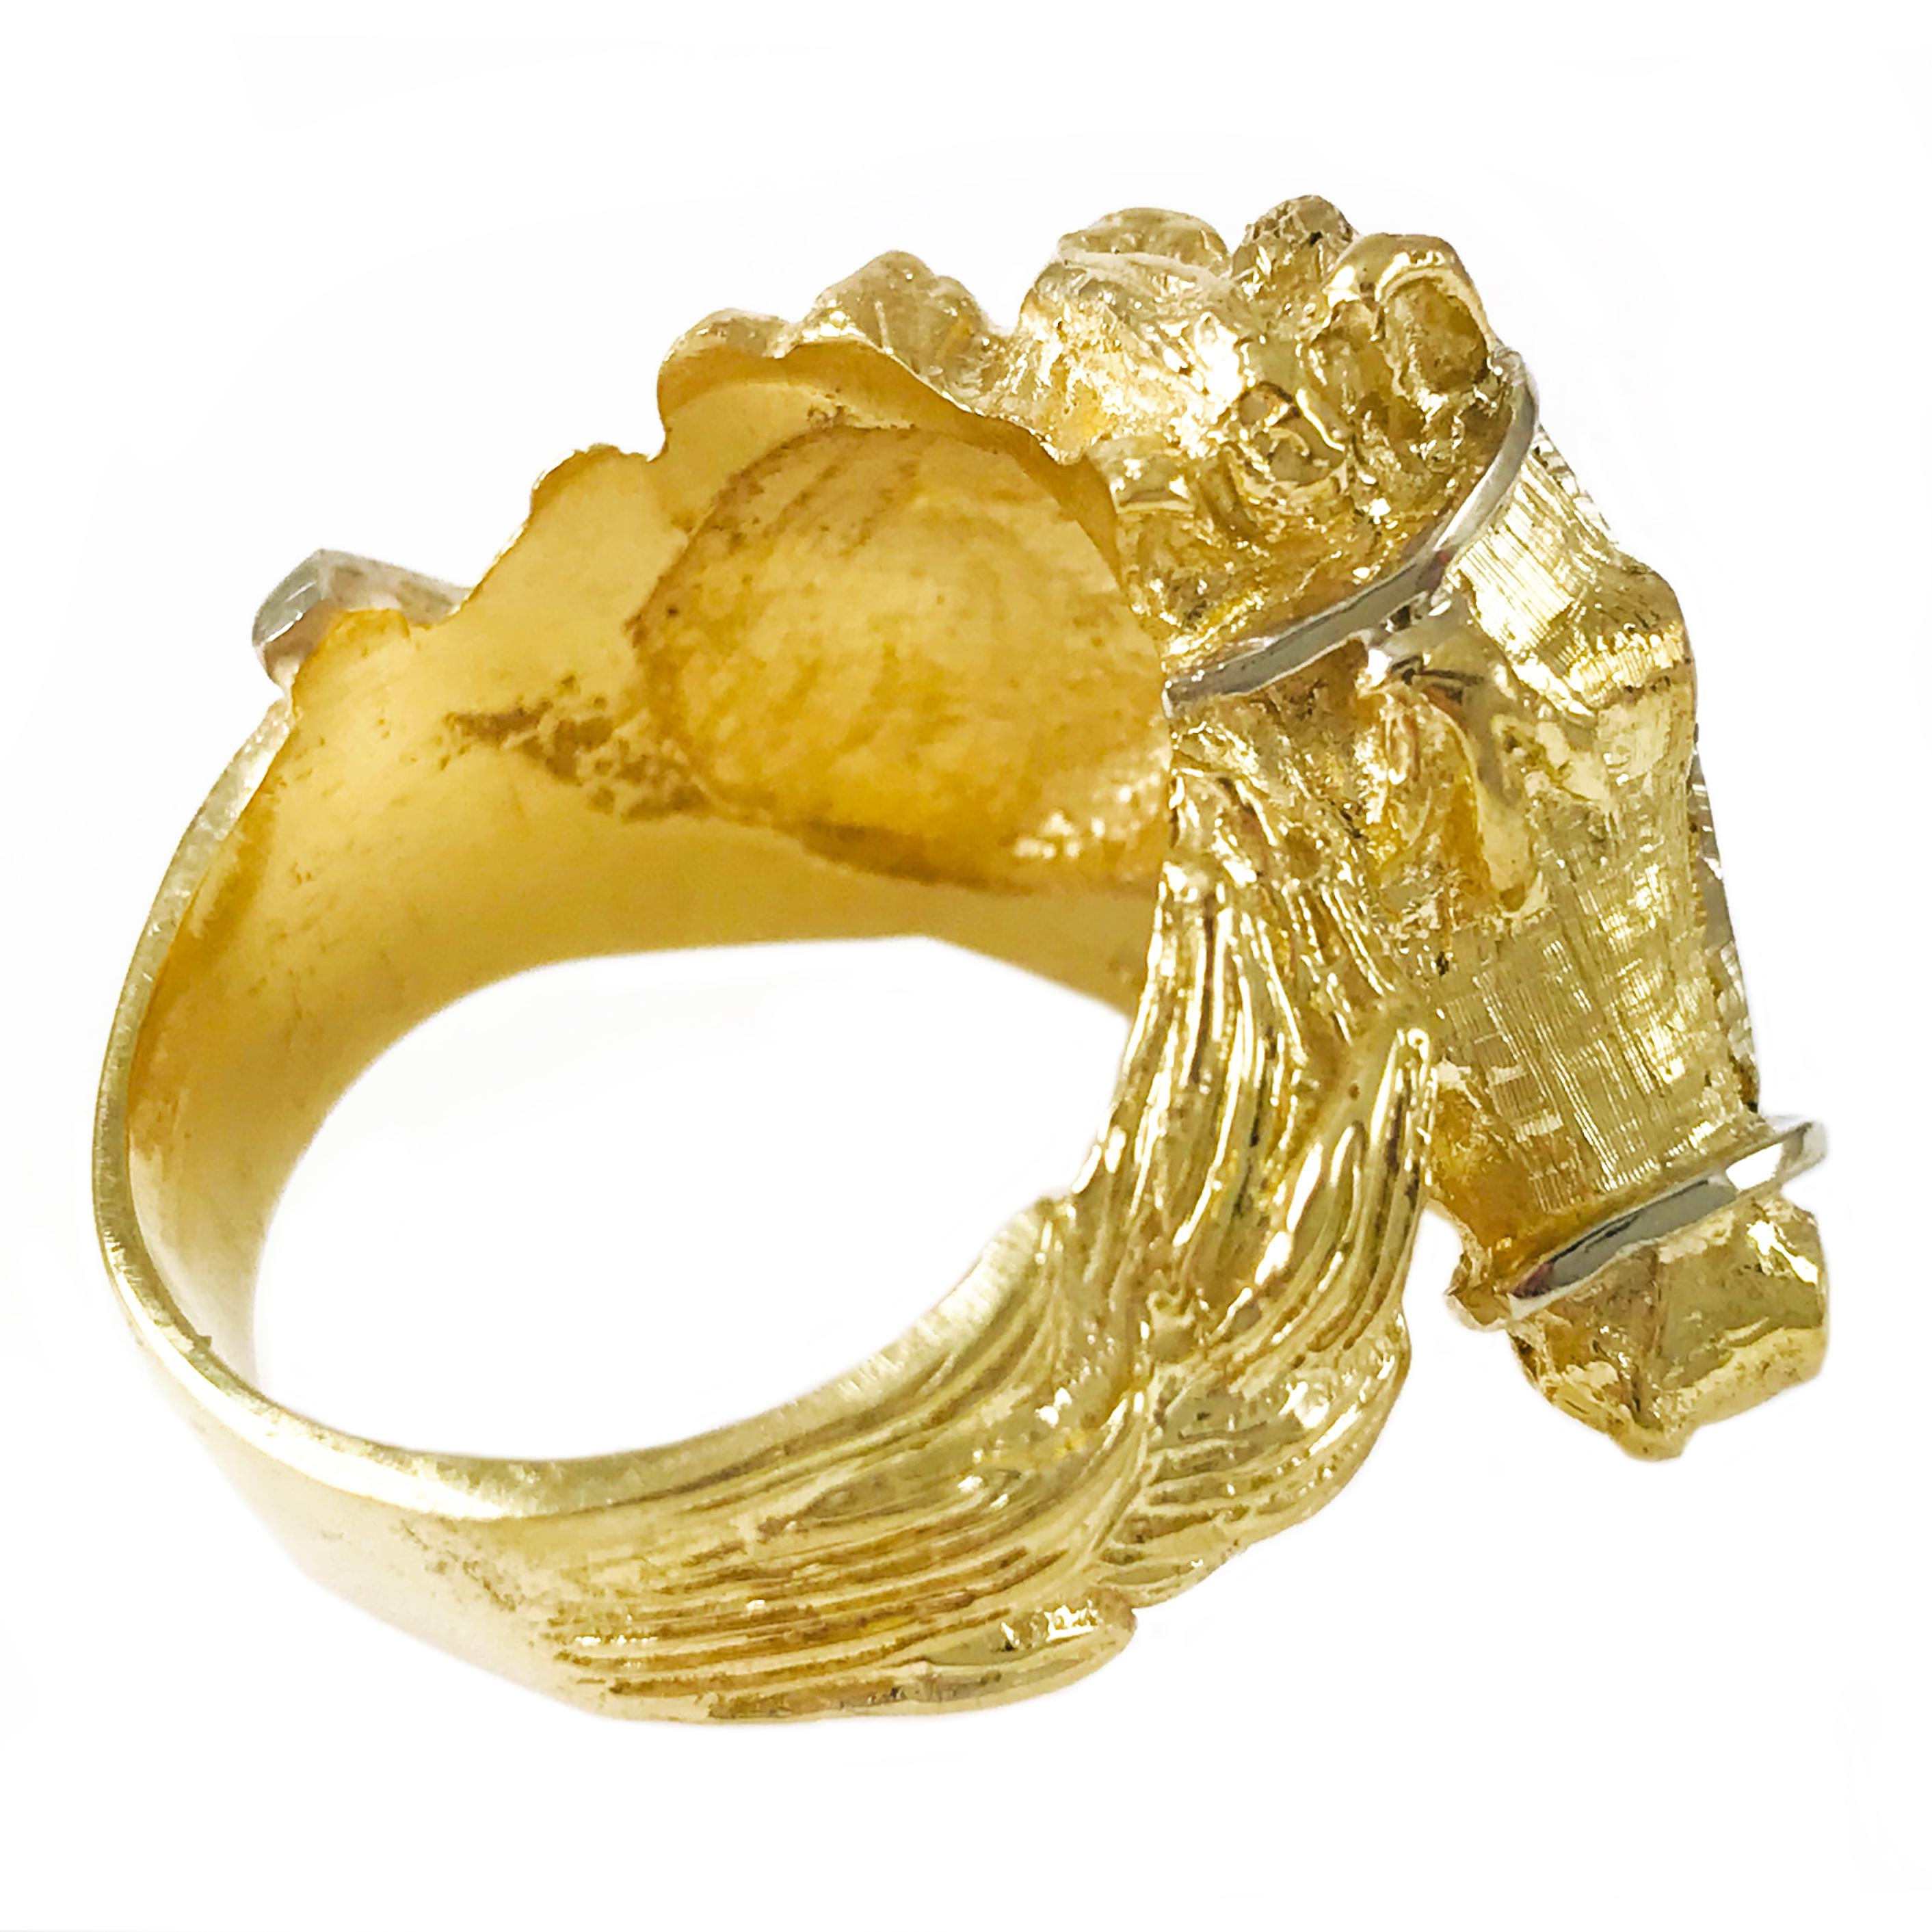 18 Karat Gold Horse Head Ring with white gold reins. Hand-carved horse head smooth and heavy textured finish shows the beauty of the ring. One round single-cut diamond bead set as the eye measuring 2.9mm for a weight of 0.08ct. The ring size is 9